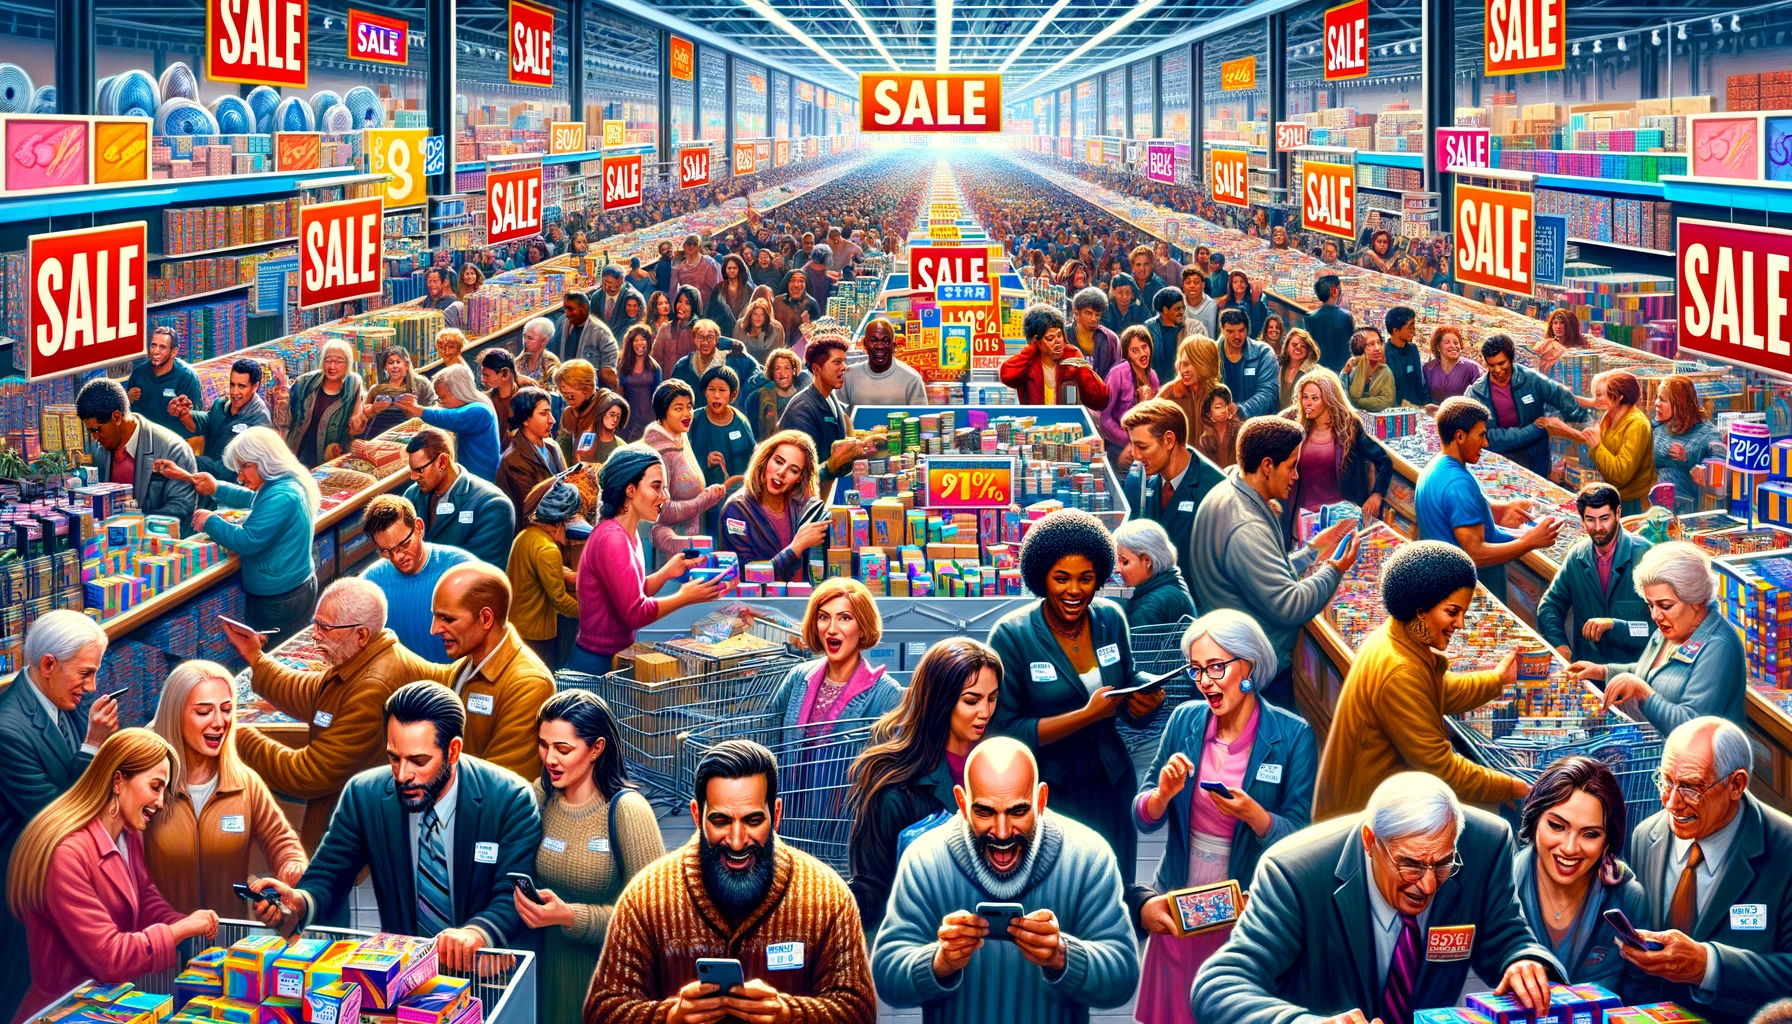 an image that captures the essence of consumer excitement during a major sale event